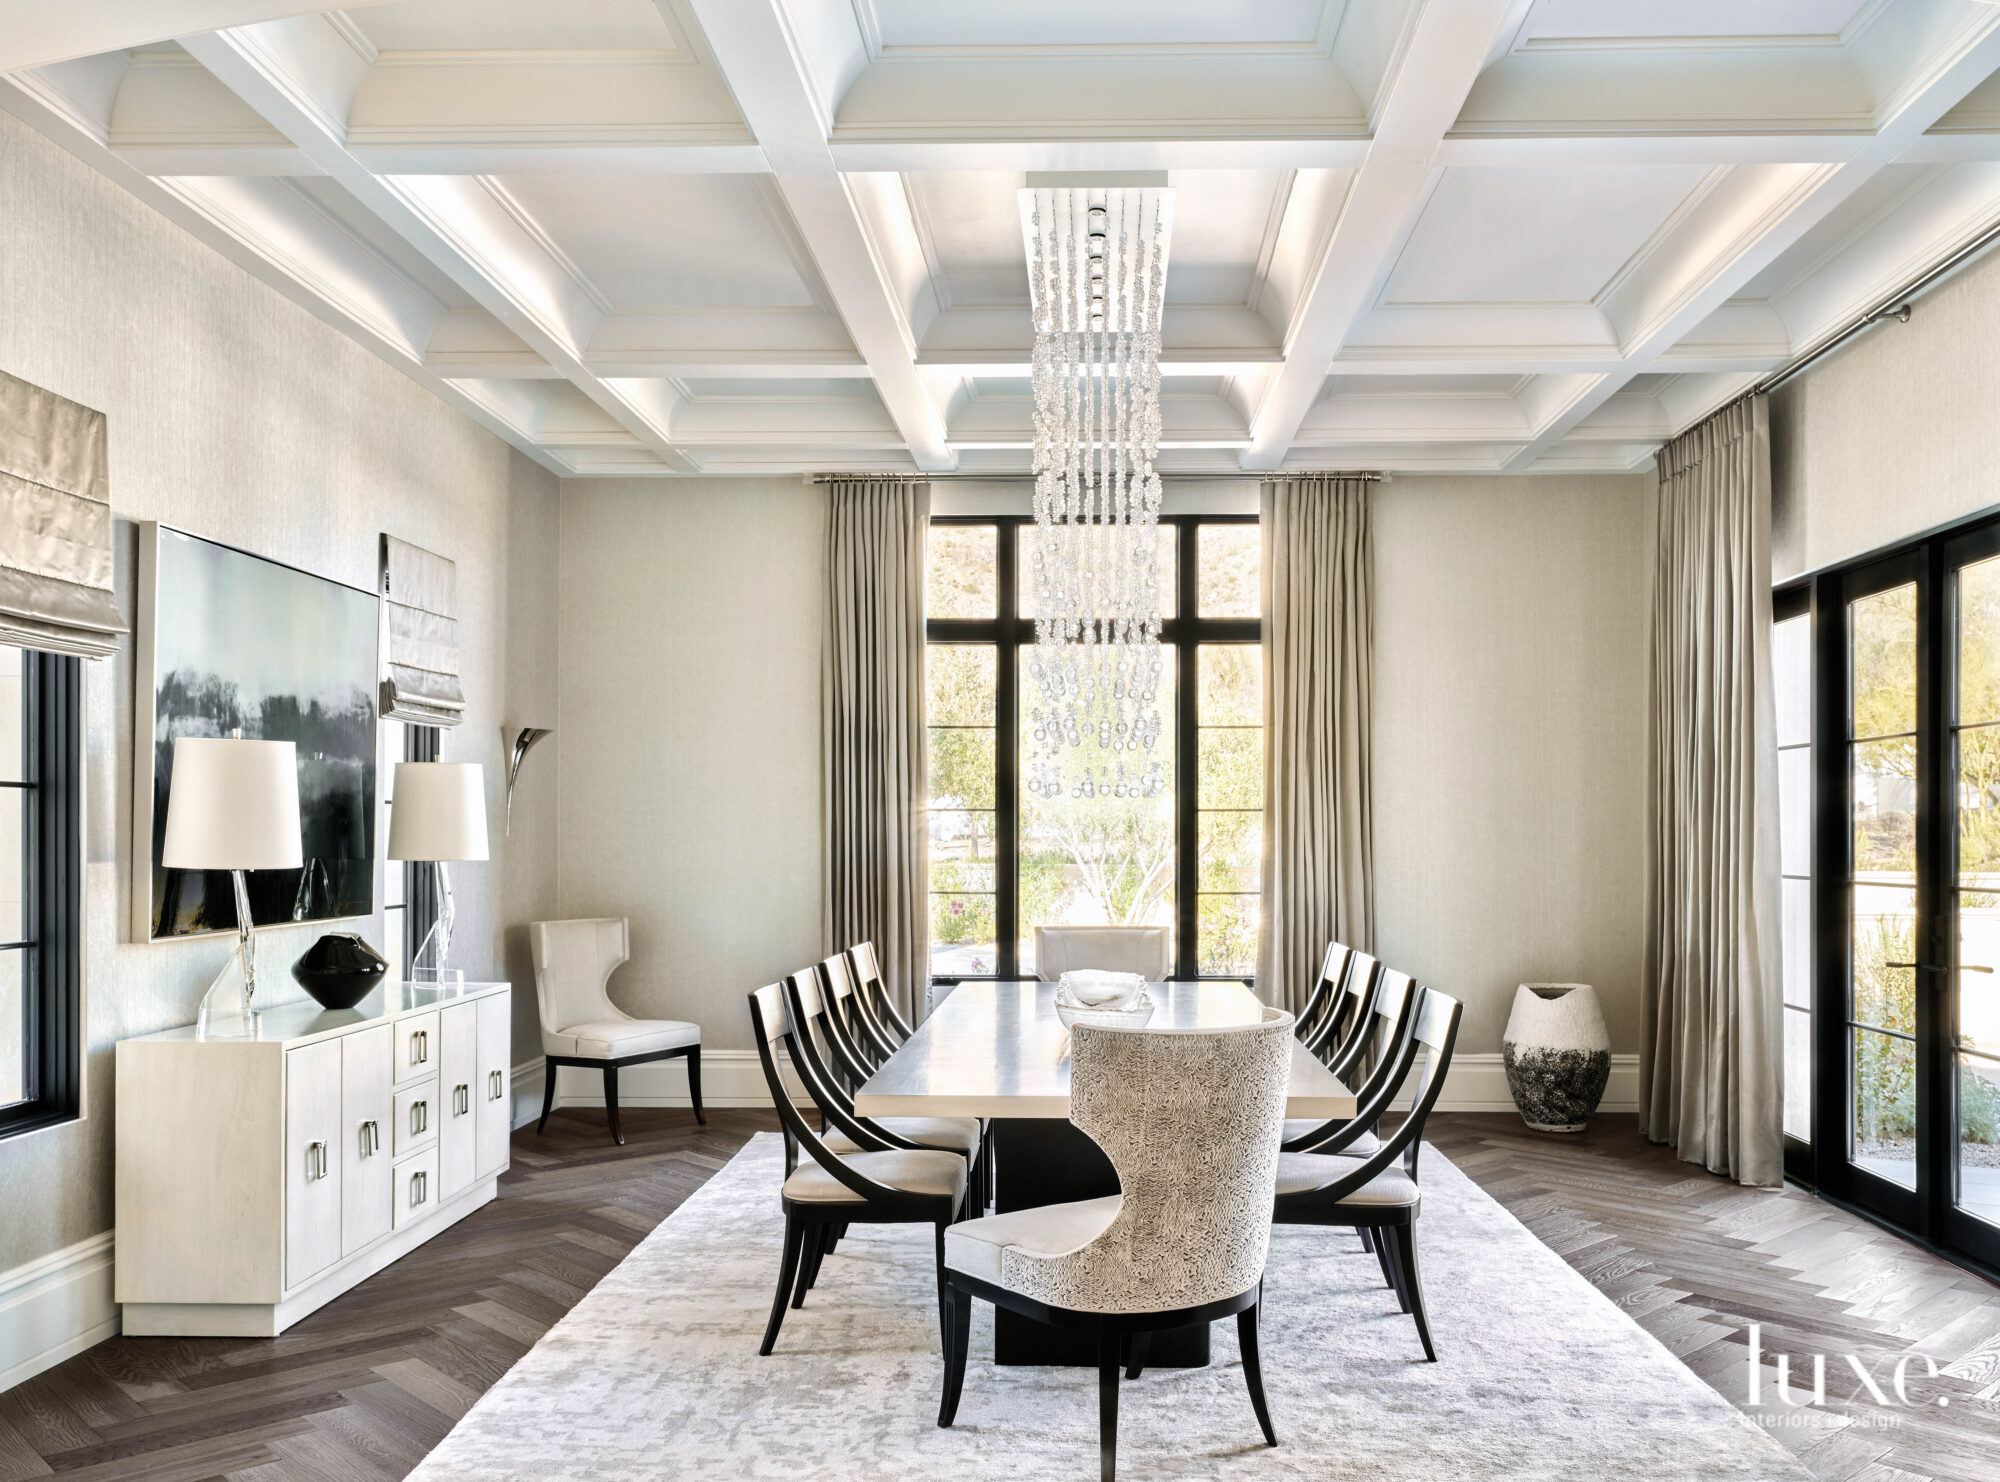 A dramatic chandelier hangs above the 10-person dining table in the dining room, which has coffered ceilings and is decorated in neutral creams and whites.